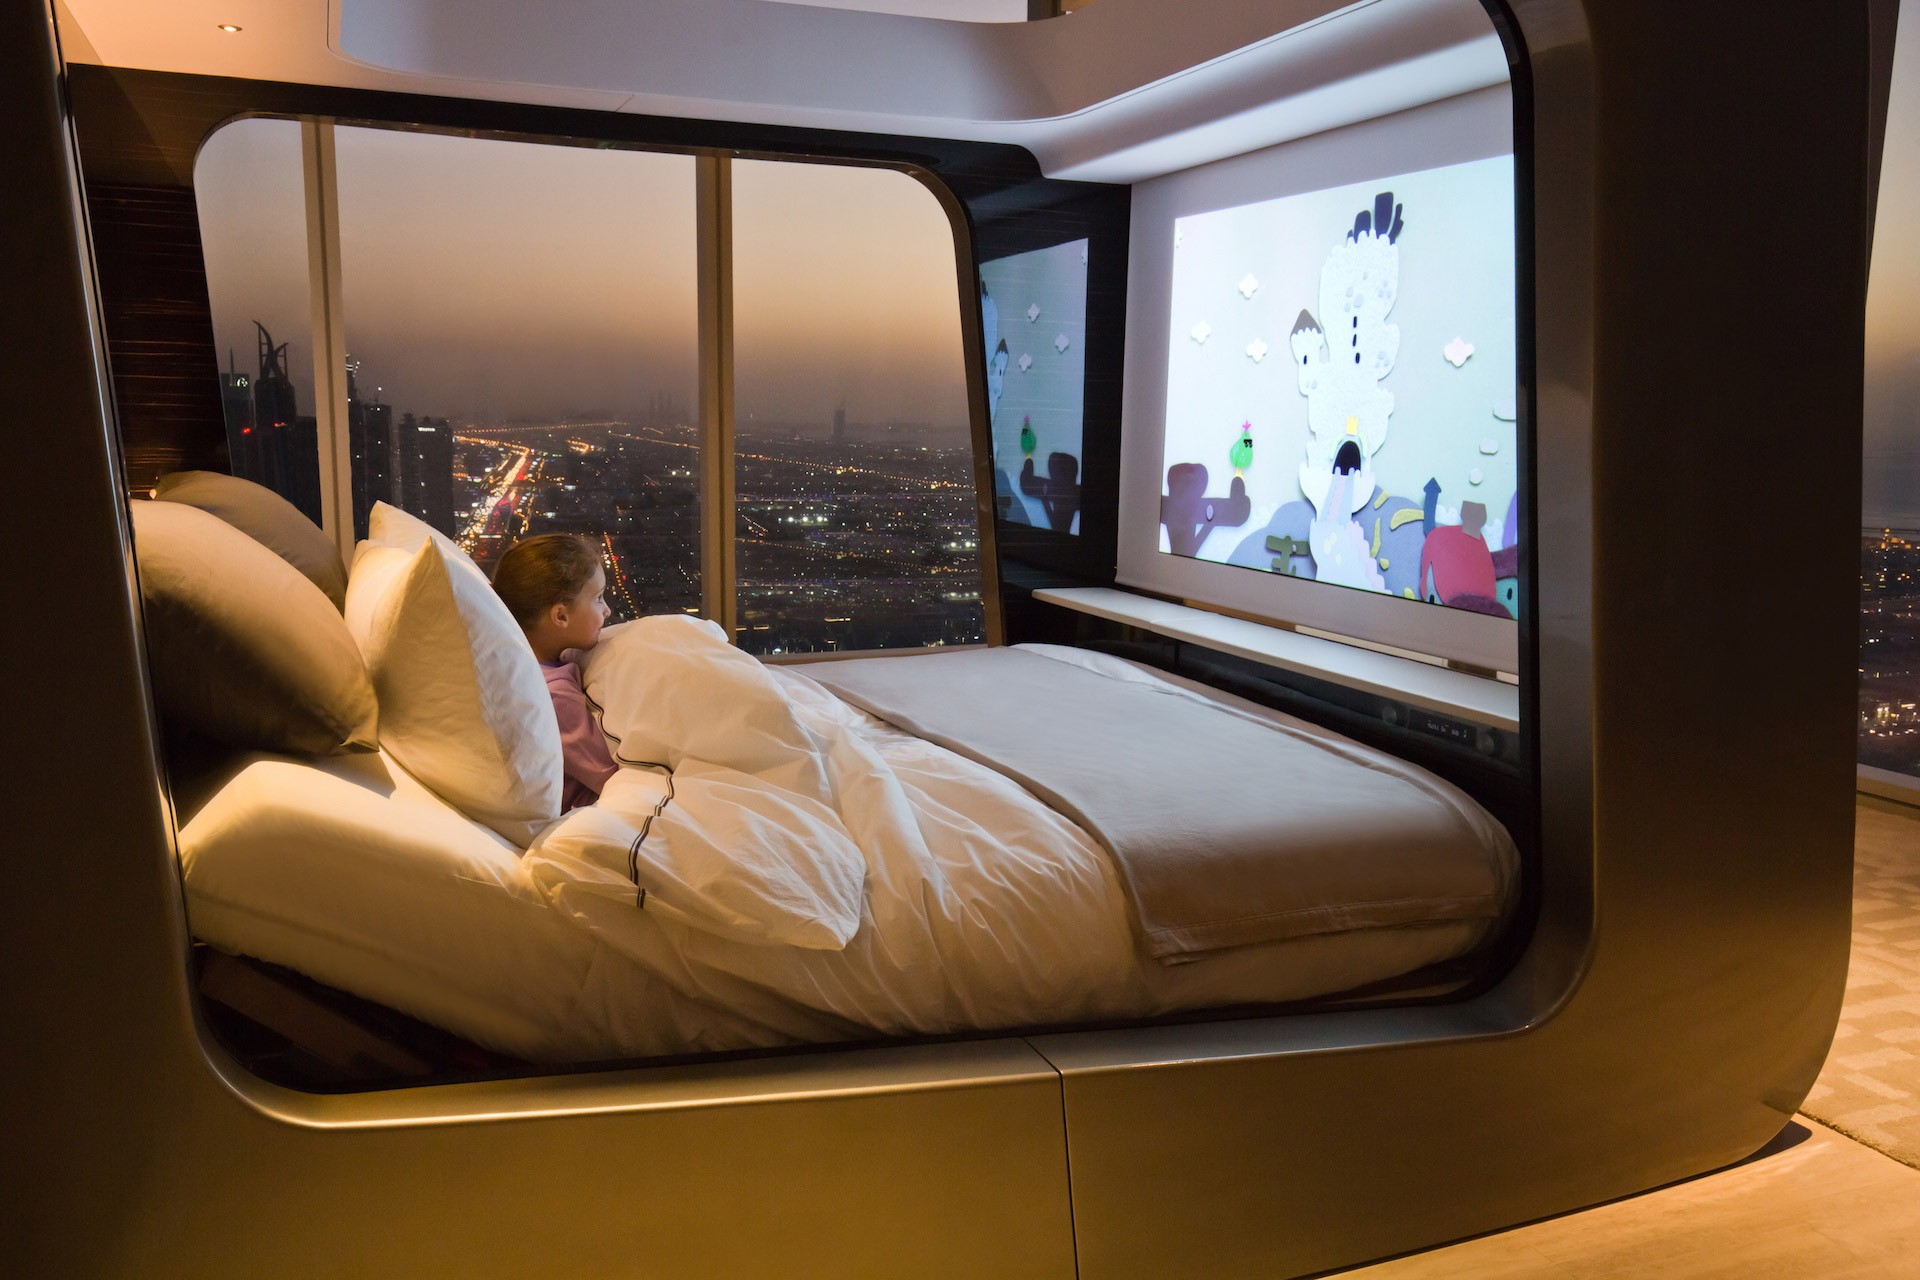 This $60K Smart Bed Doubles as a Home Cinema, Comes With a 70-Inch TV